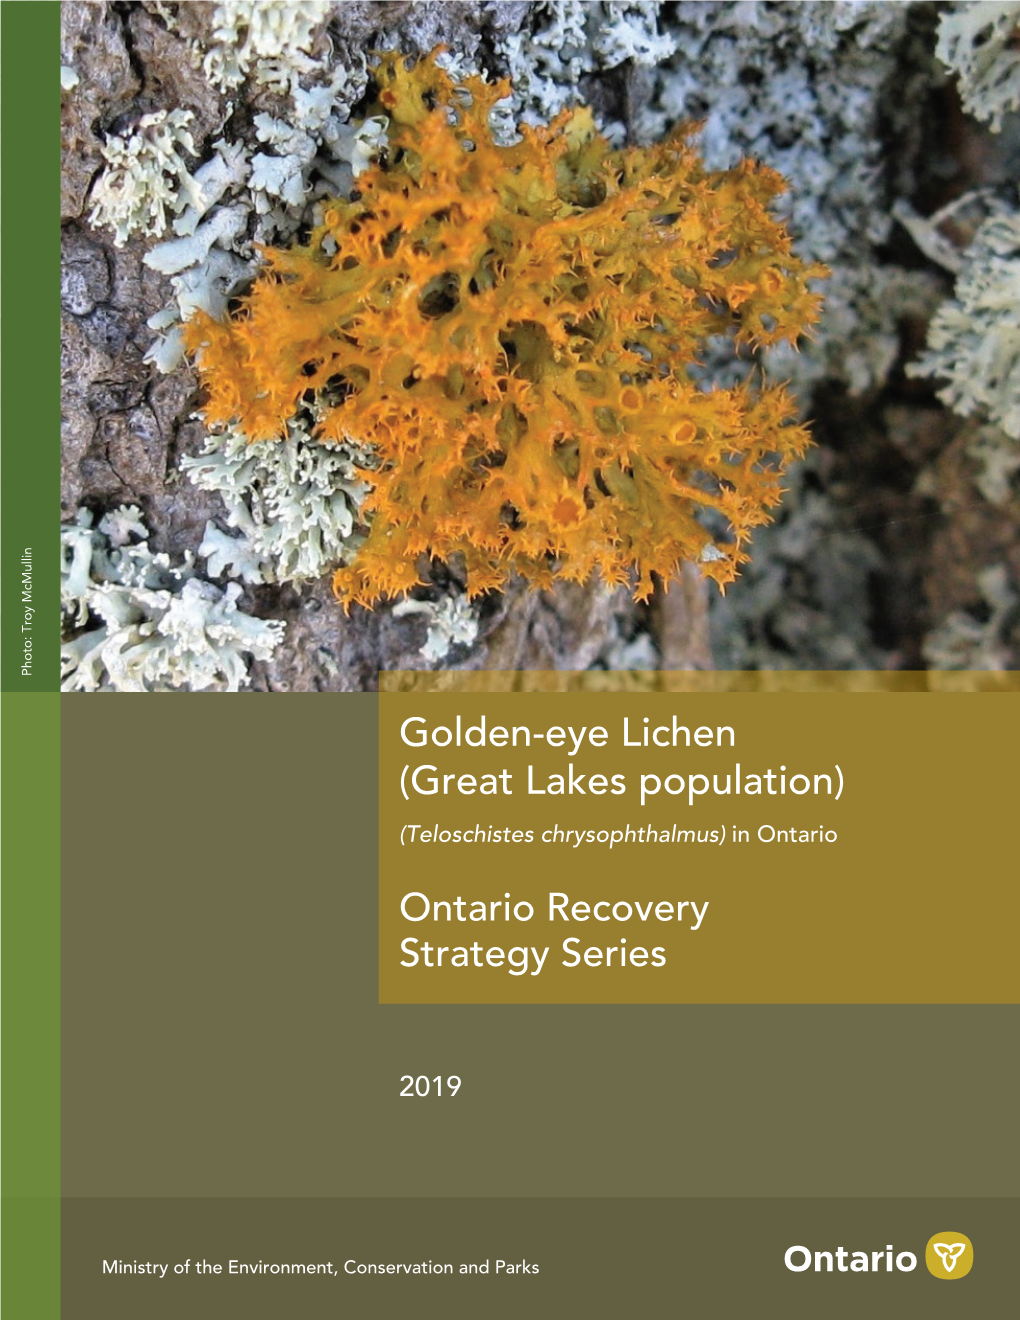 Recovery Strategy for the Golden-Eye Lichen (Teloschistes Chrysophthalmus) – Great Lakes Population in Ontario